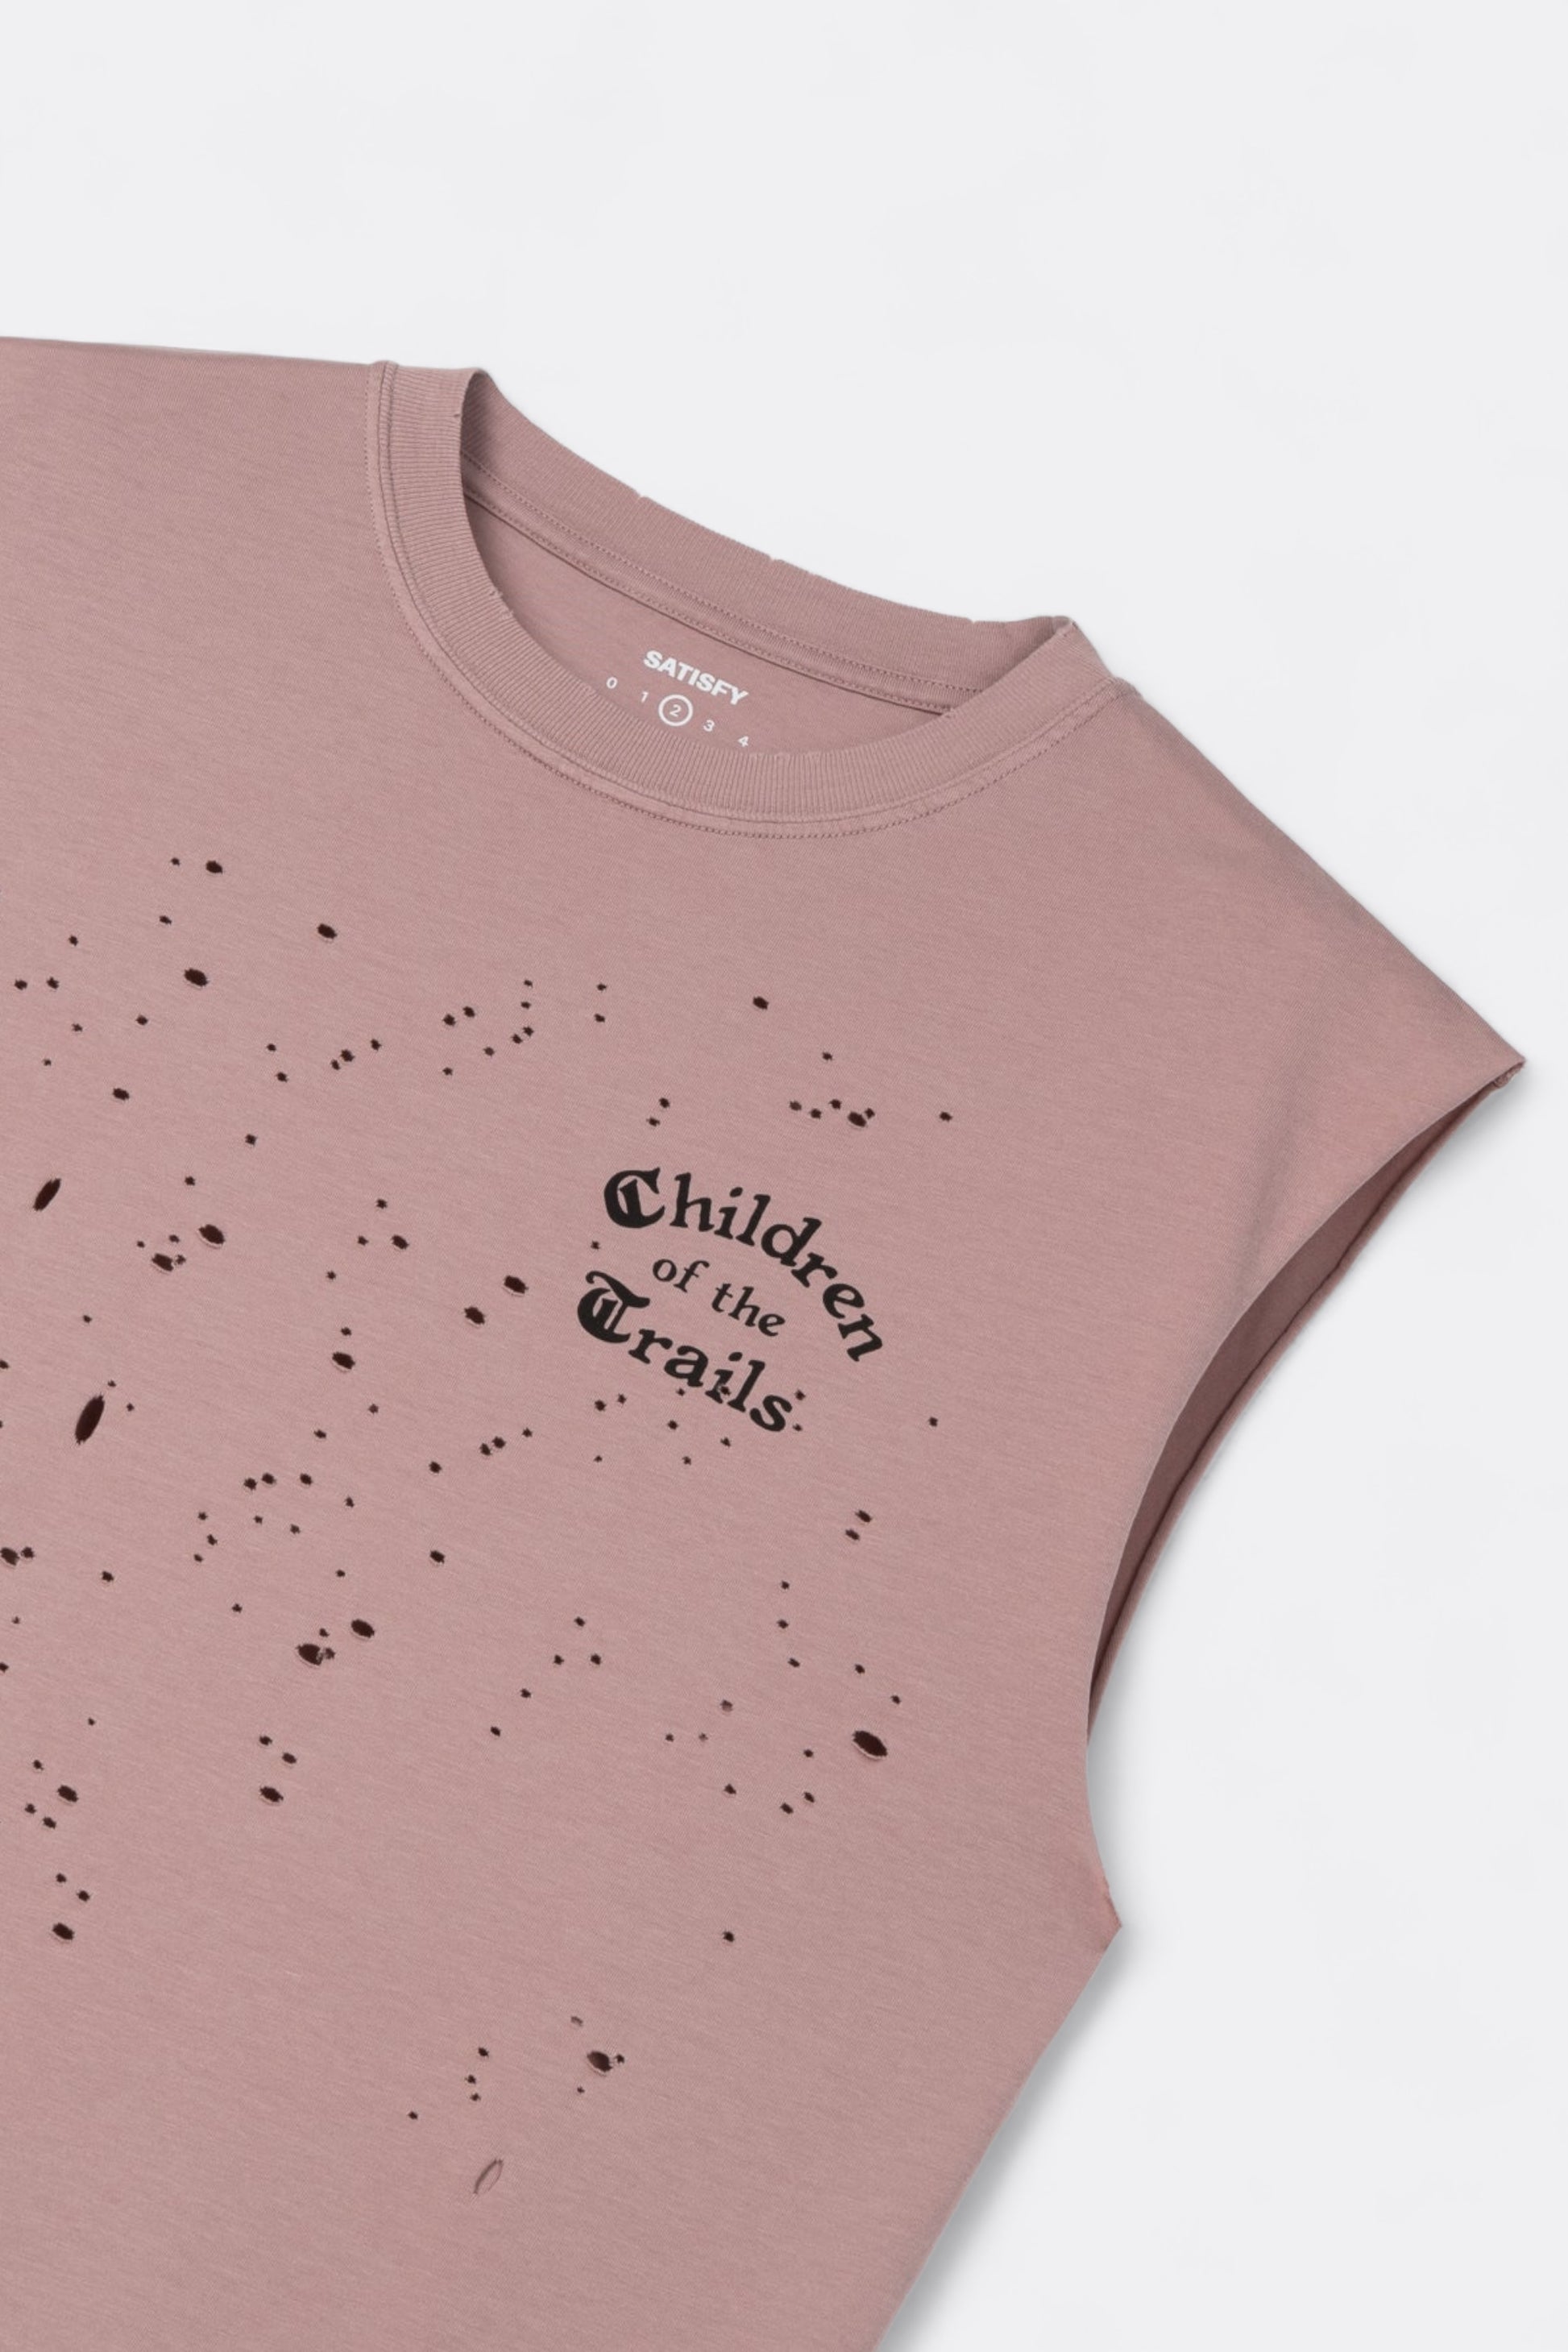 Satisfy - MothTech™ Muscle Tee (Aged Ash Rose)